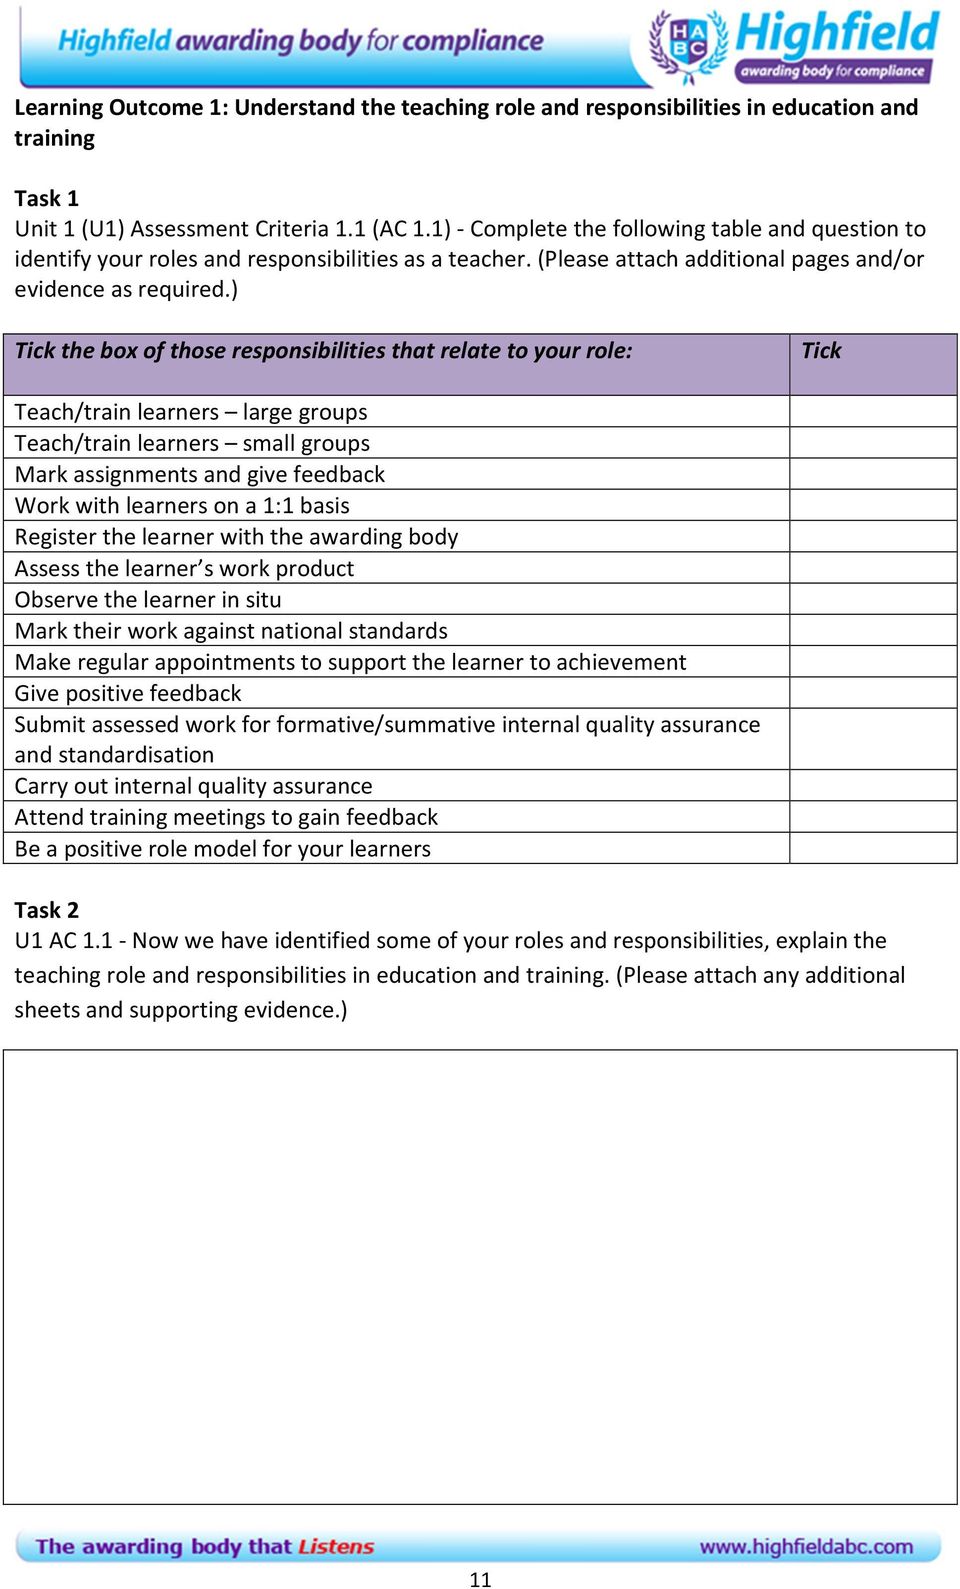 ) Tick the box of those responsibilities that relate to your role: Tick Teach/train learners large groups Teach/train learners small groups Mark assignments and give feedback Work with learners on a